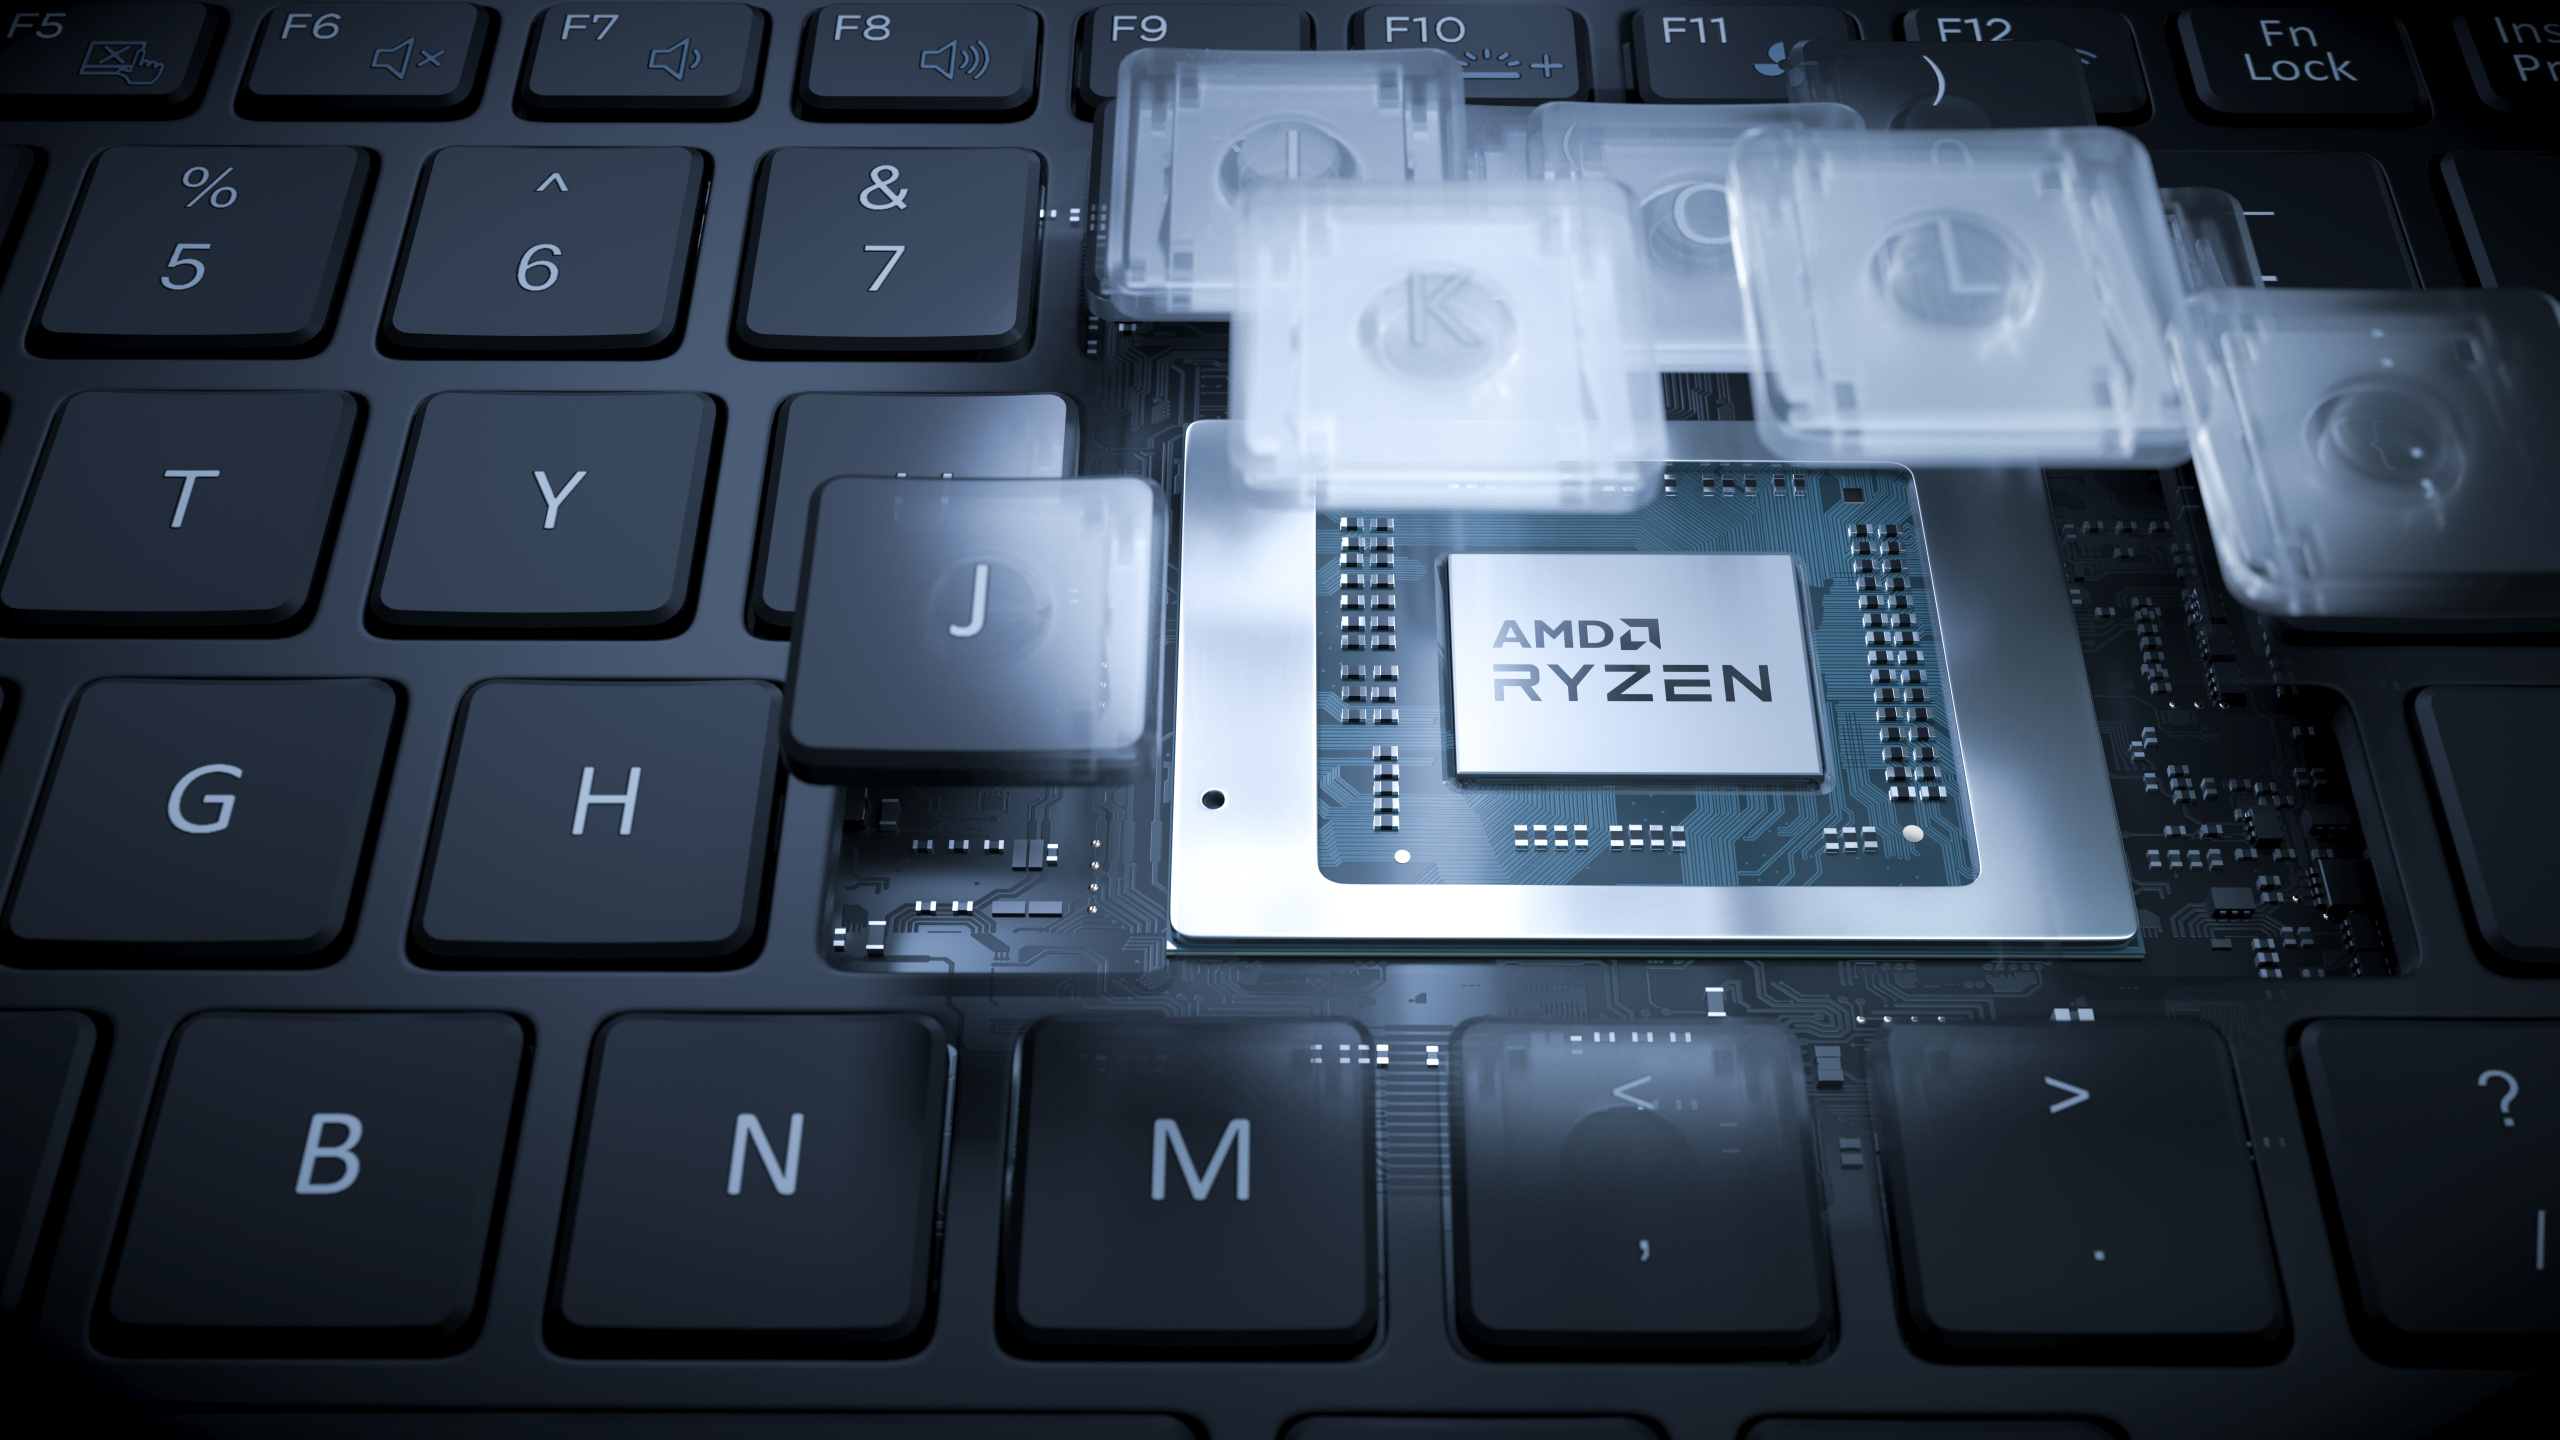 Wow, this new AMD Ryzen laptop CPU can run Crysis even without a cooler